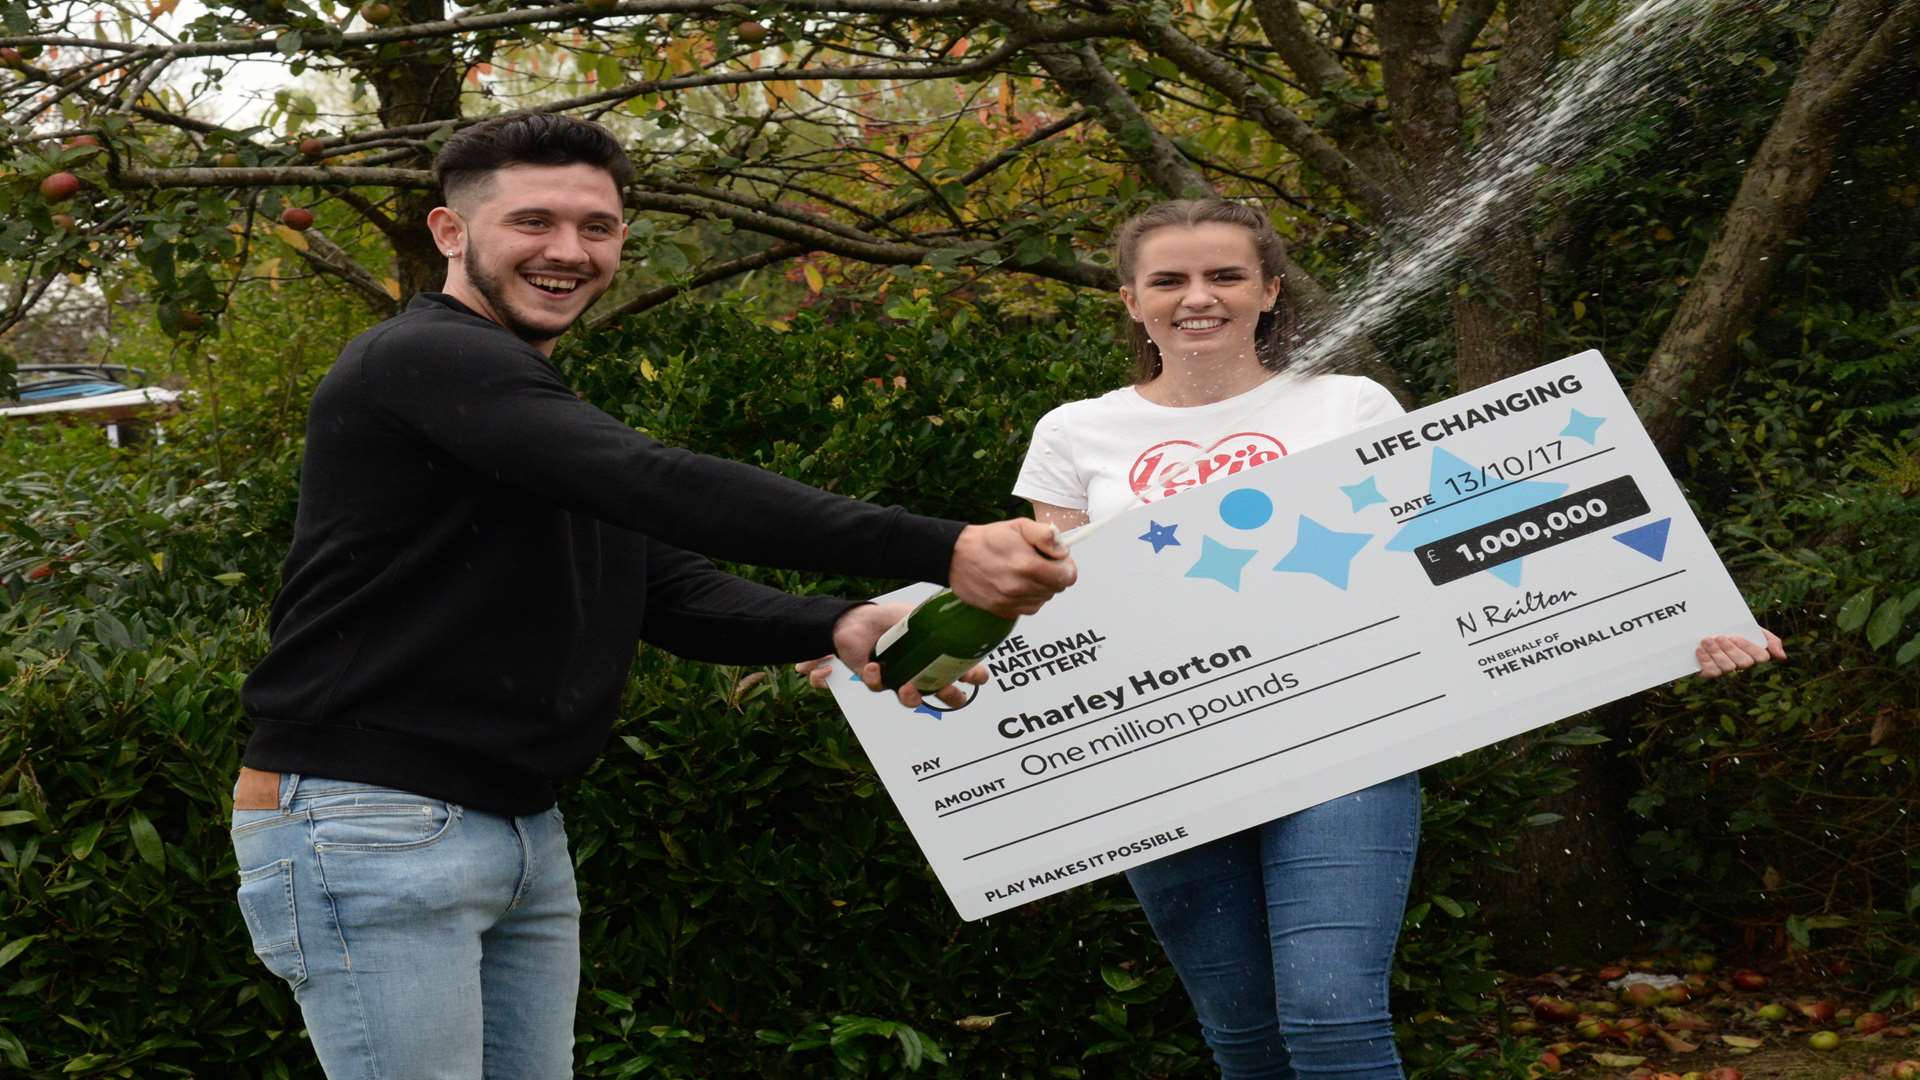 Charley Horton and girlfriend Emma Fisher of Ashford who broke the Friday 13th curse by winning £1 Million on the National Lottery.